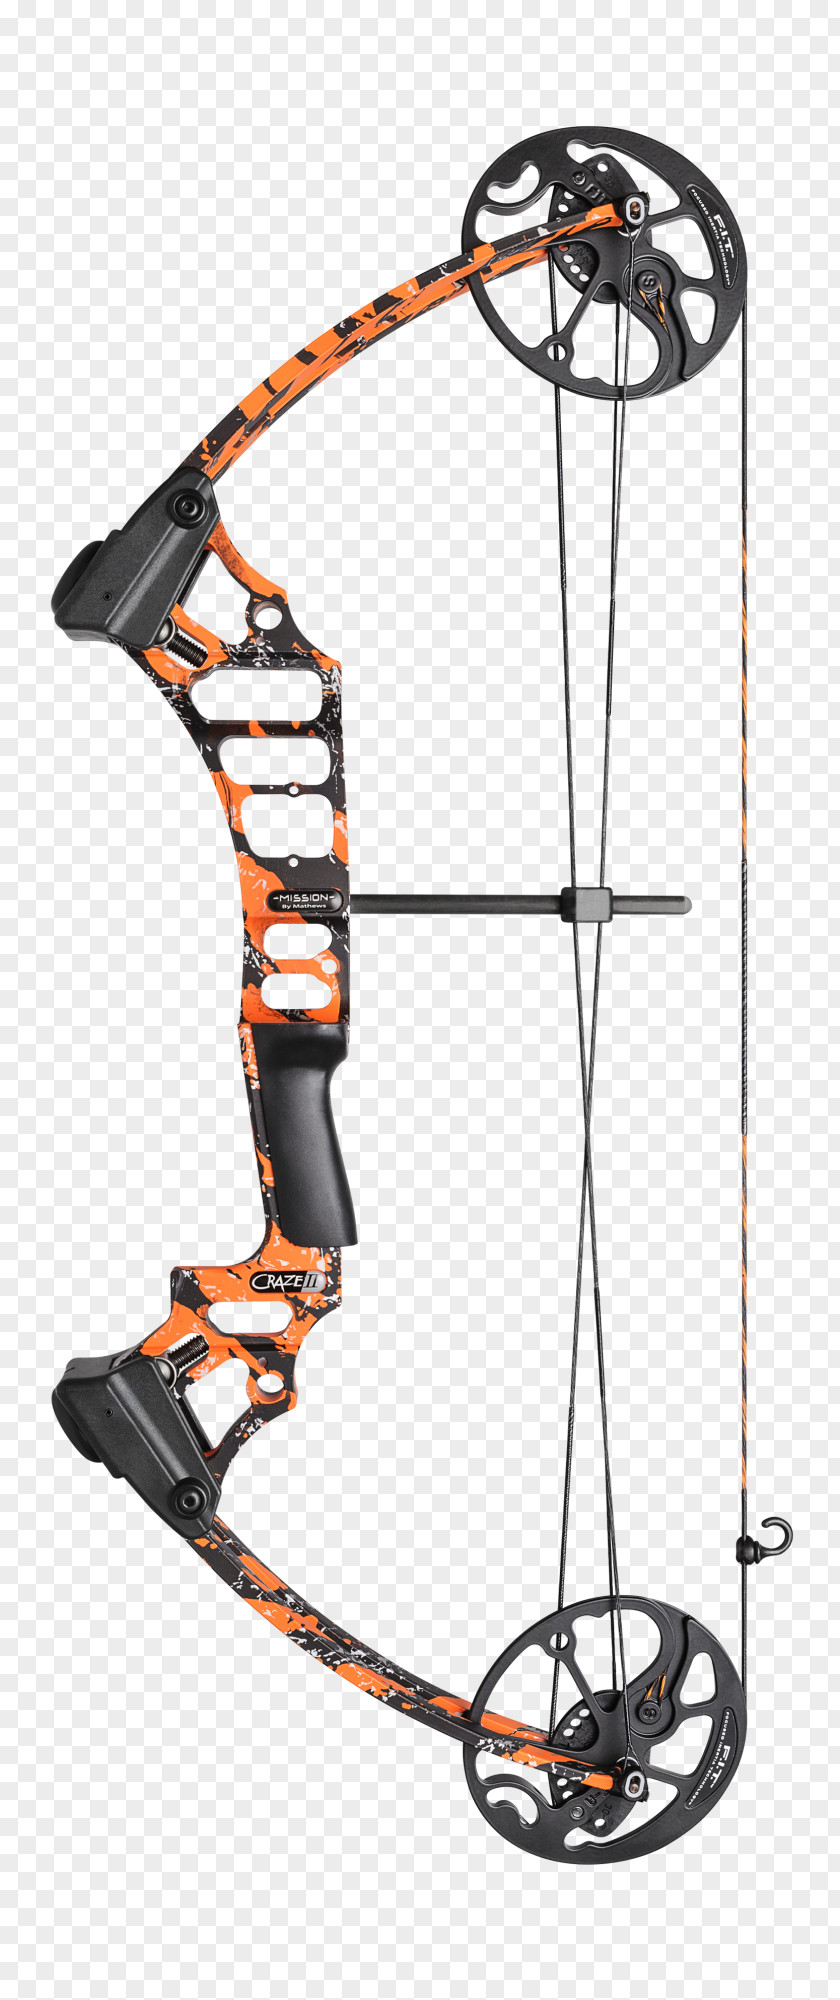 Archery Training Compound Bows Bow And Arrow Bowhunting PNG